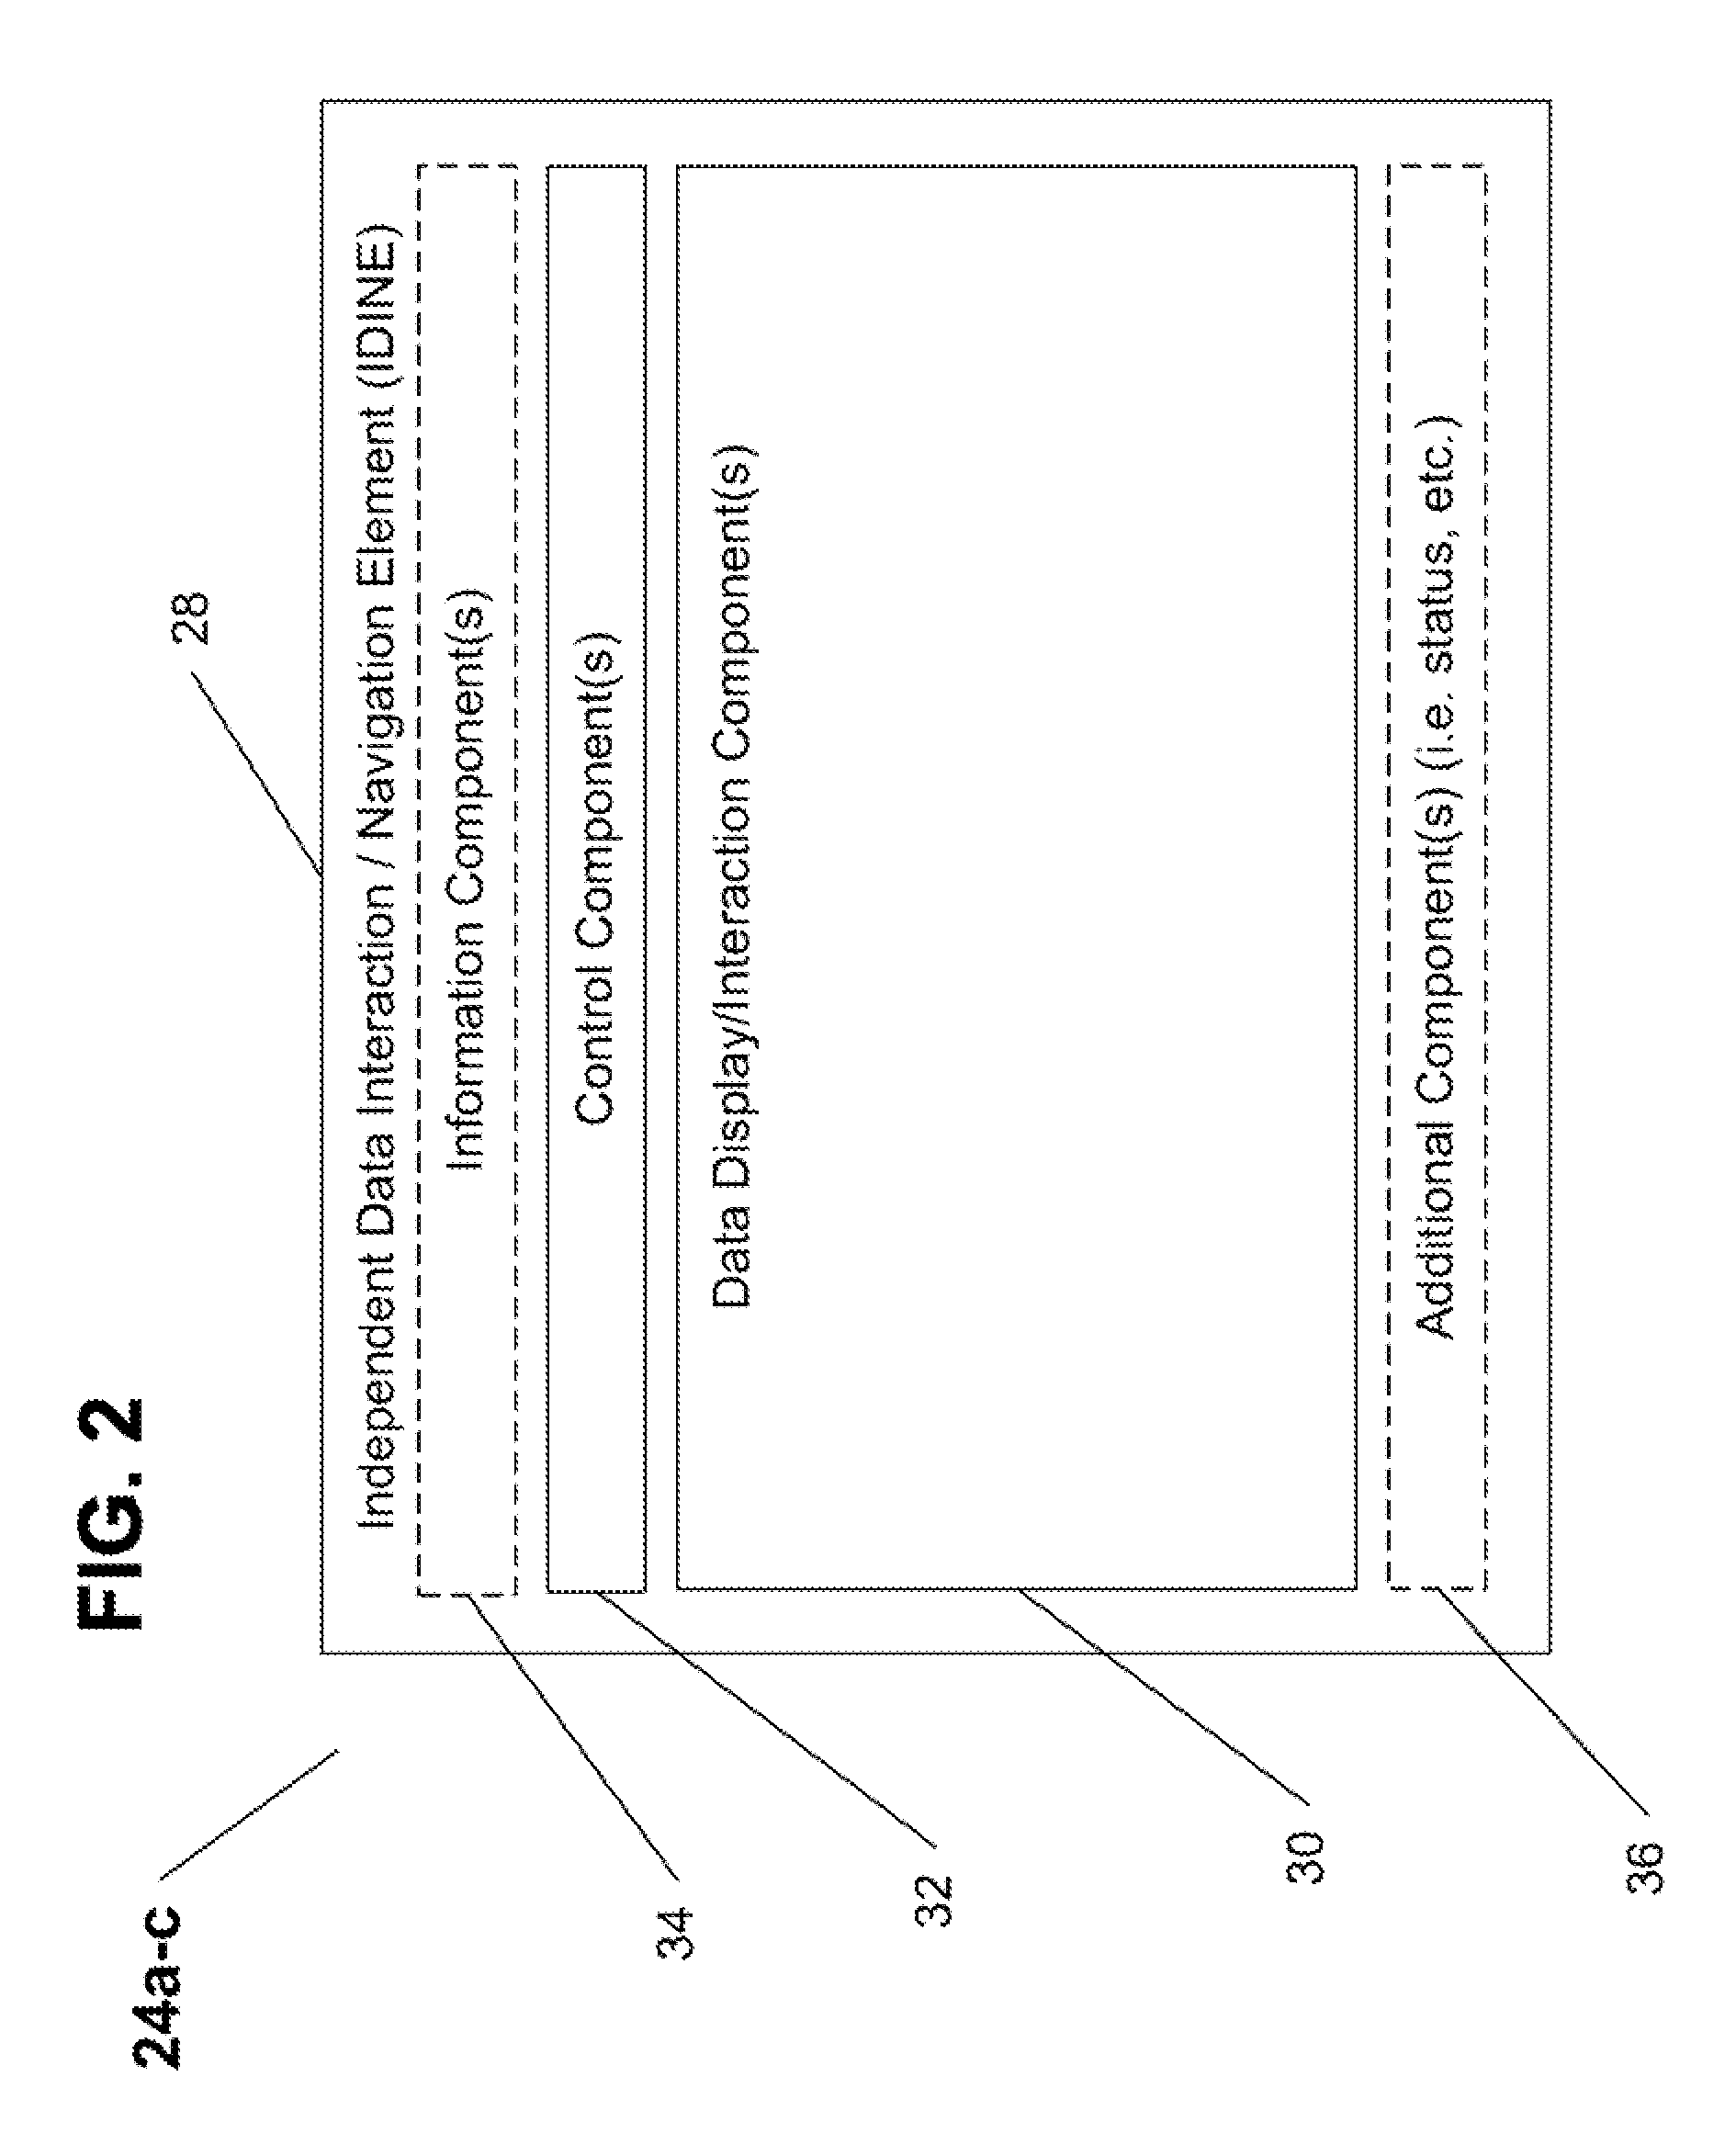 System and Method for Enabling at Least One Independent Data Navigation and Interaction Activity Within a Document